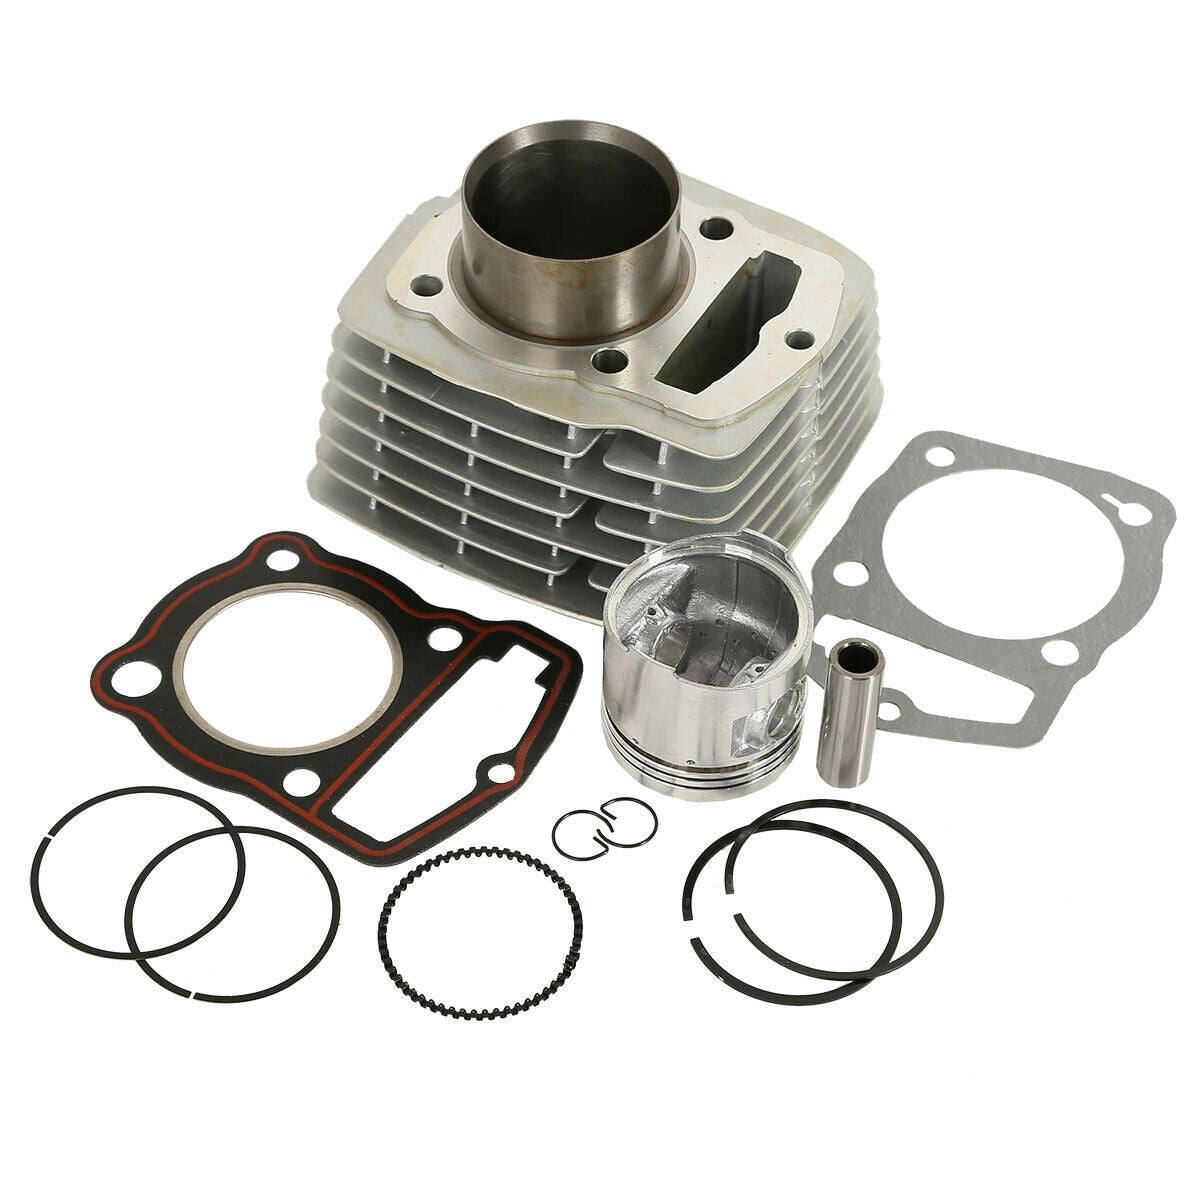 🔥 Cylinder Piston Rings Gasket Rebuild Kit Fit For Honda CB125S CL125S XL SL125 - Moto Life Products